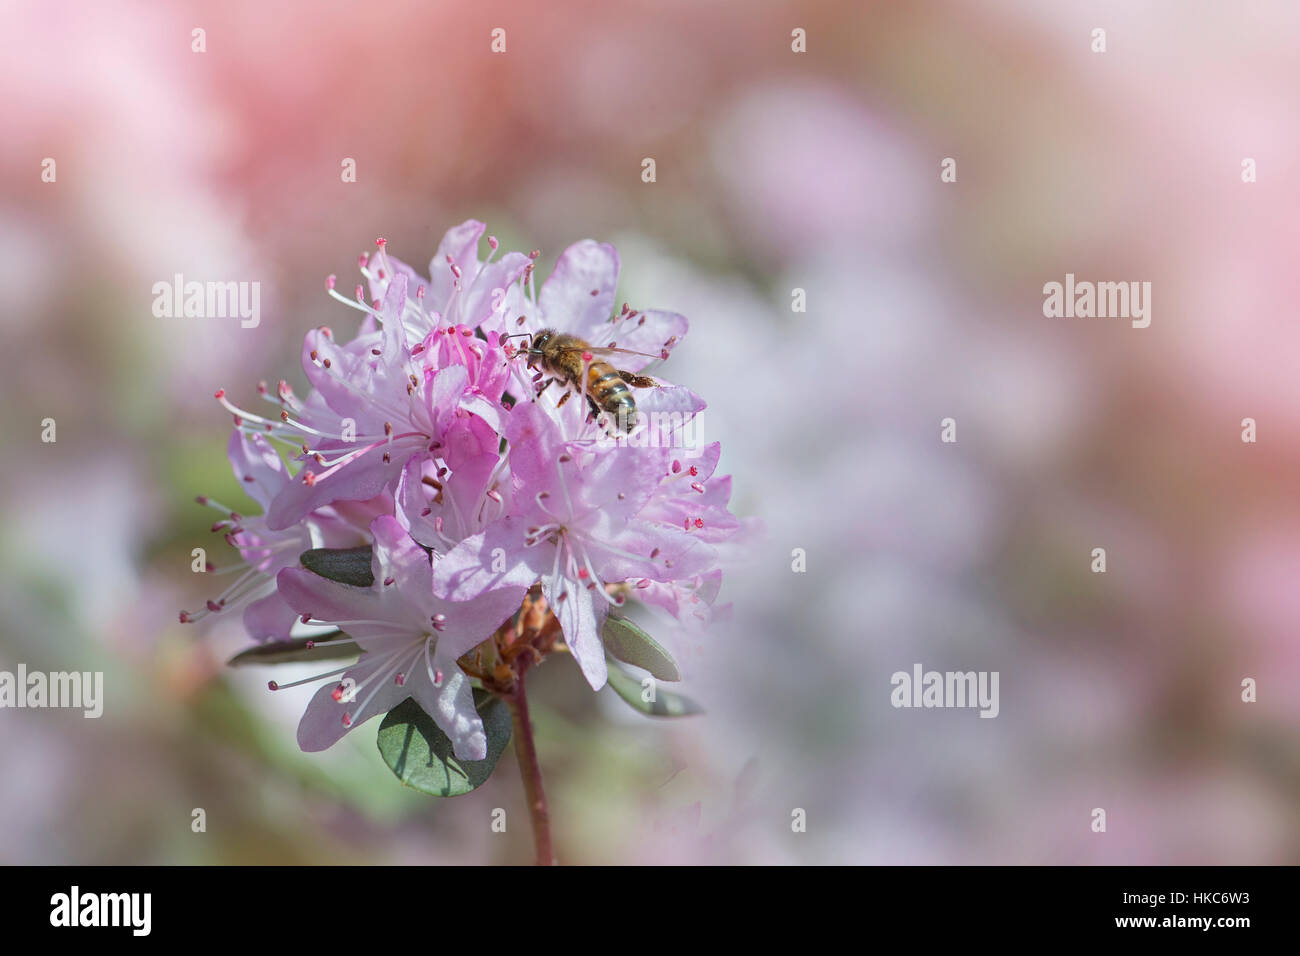 Pale pink Rhododendron flower with a bee collecting pollen, image taken against a soft background. Stock Photo